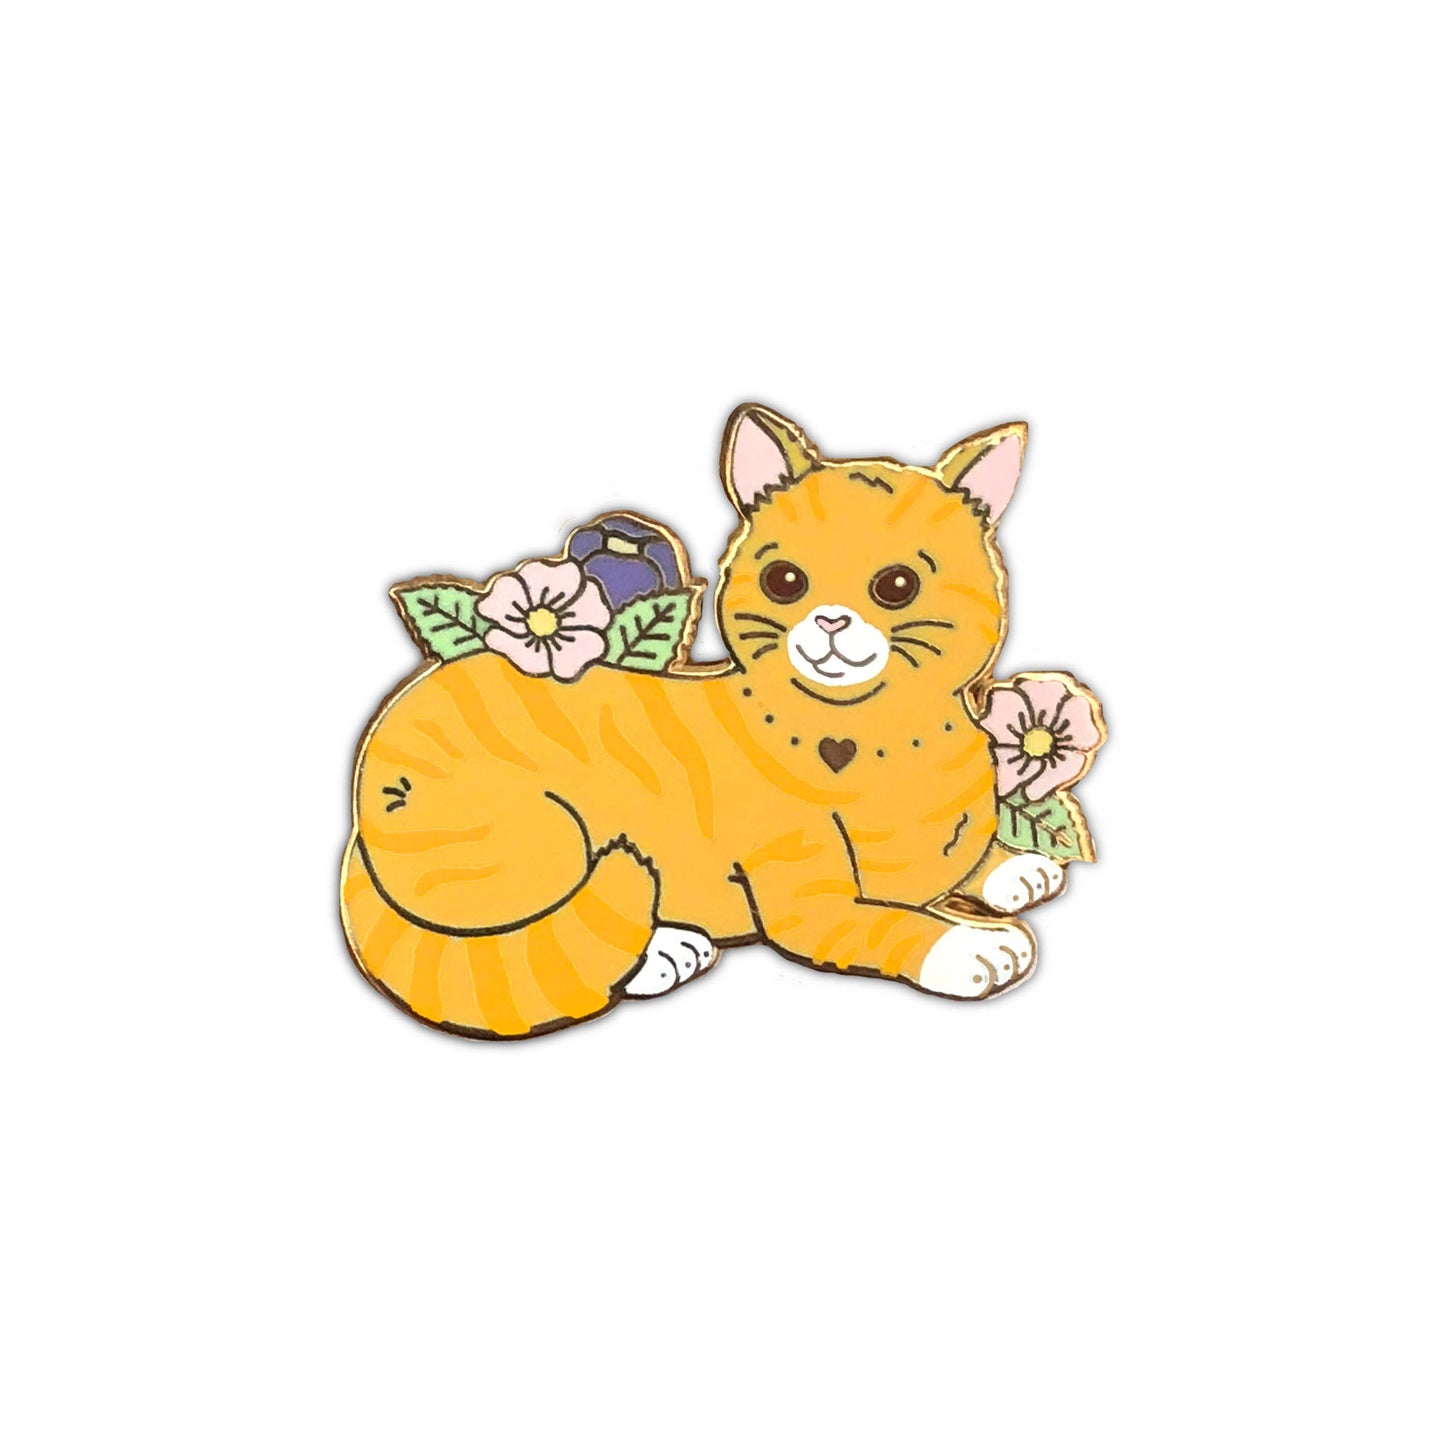 Orange Tabby Cat Enamel Pin - expected mid August - reserve now!